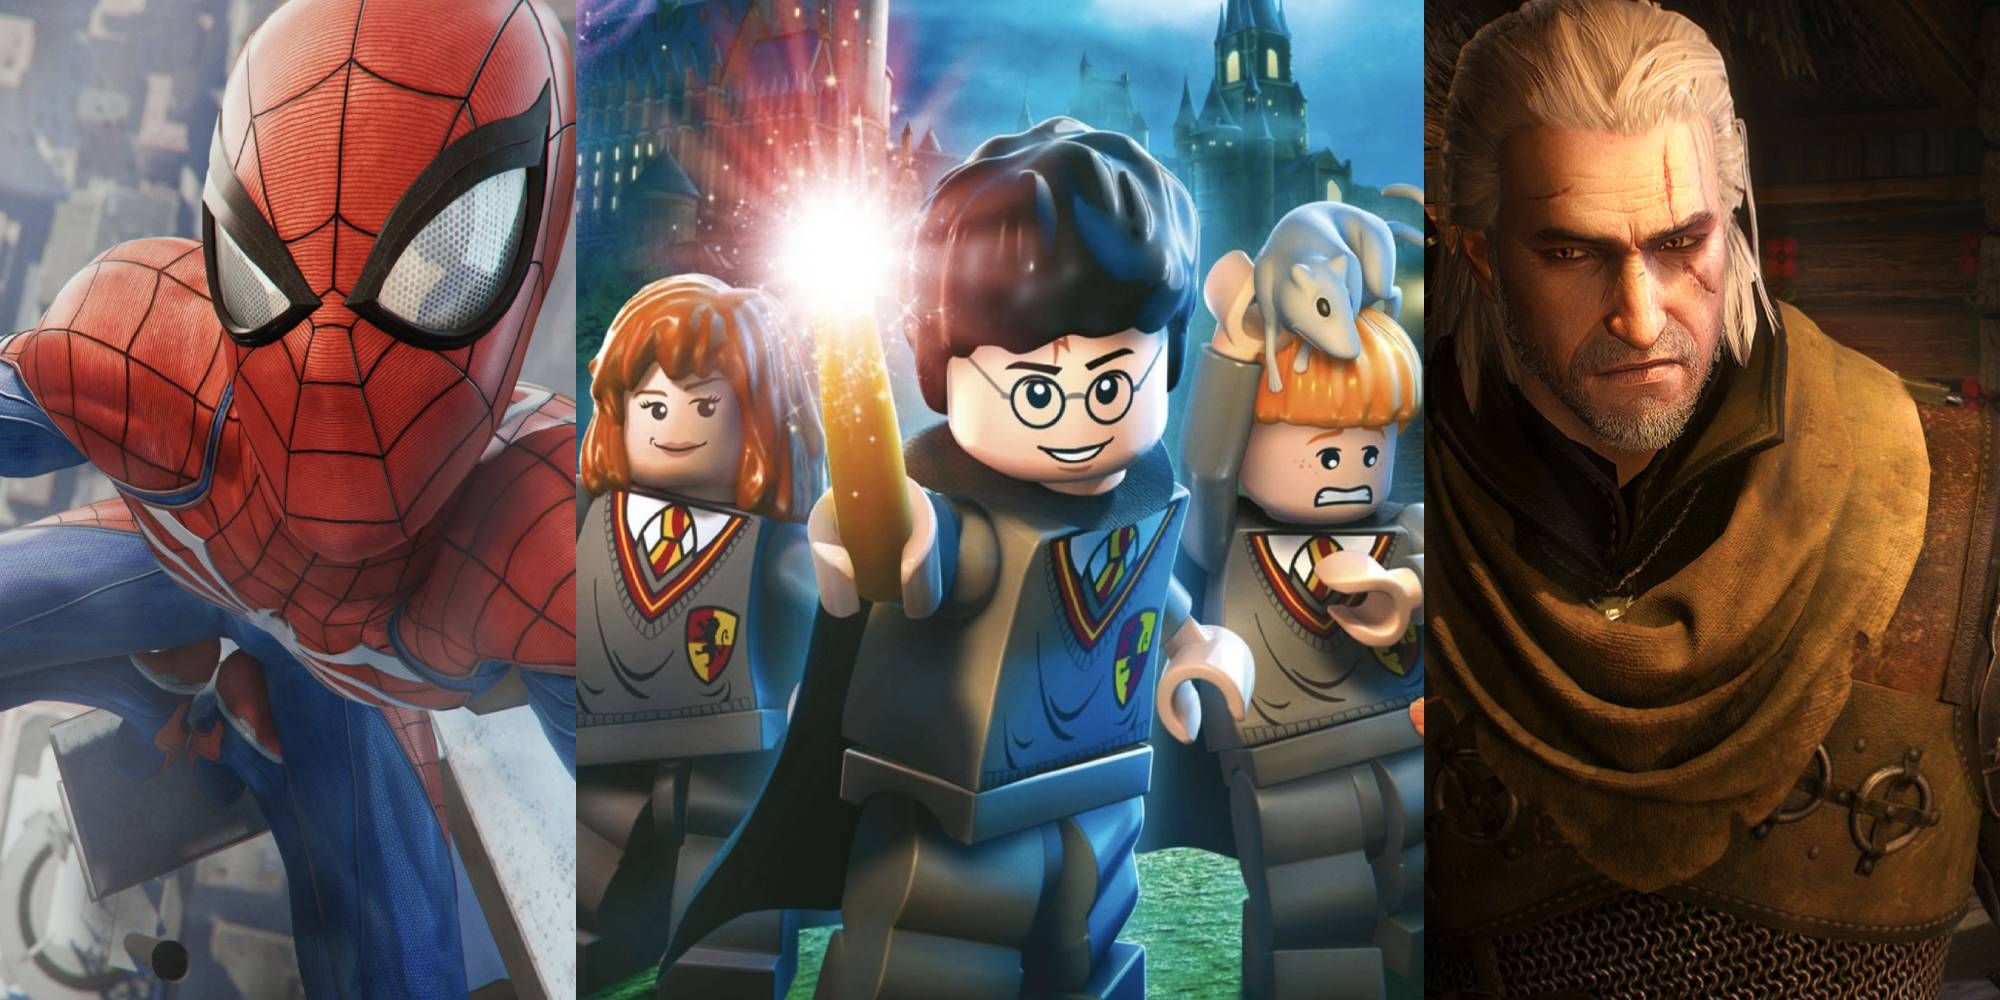 Split image of Spider-Man, Harry Potter, and The Witcher games